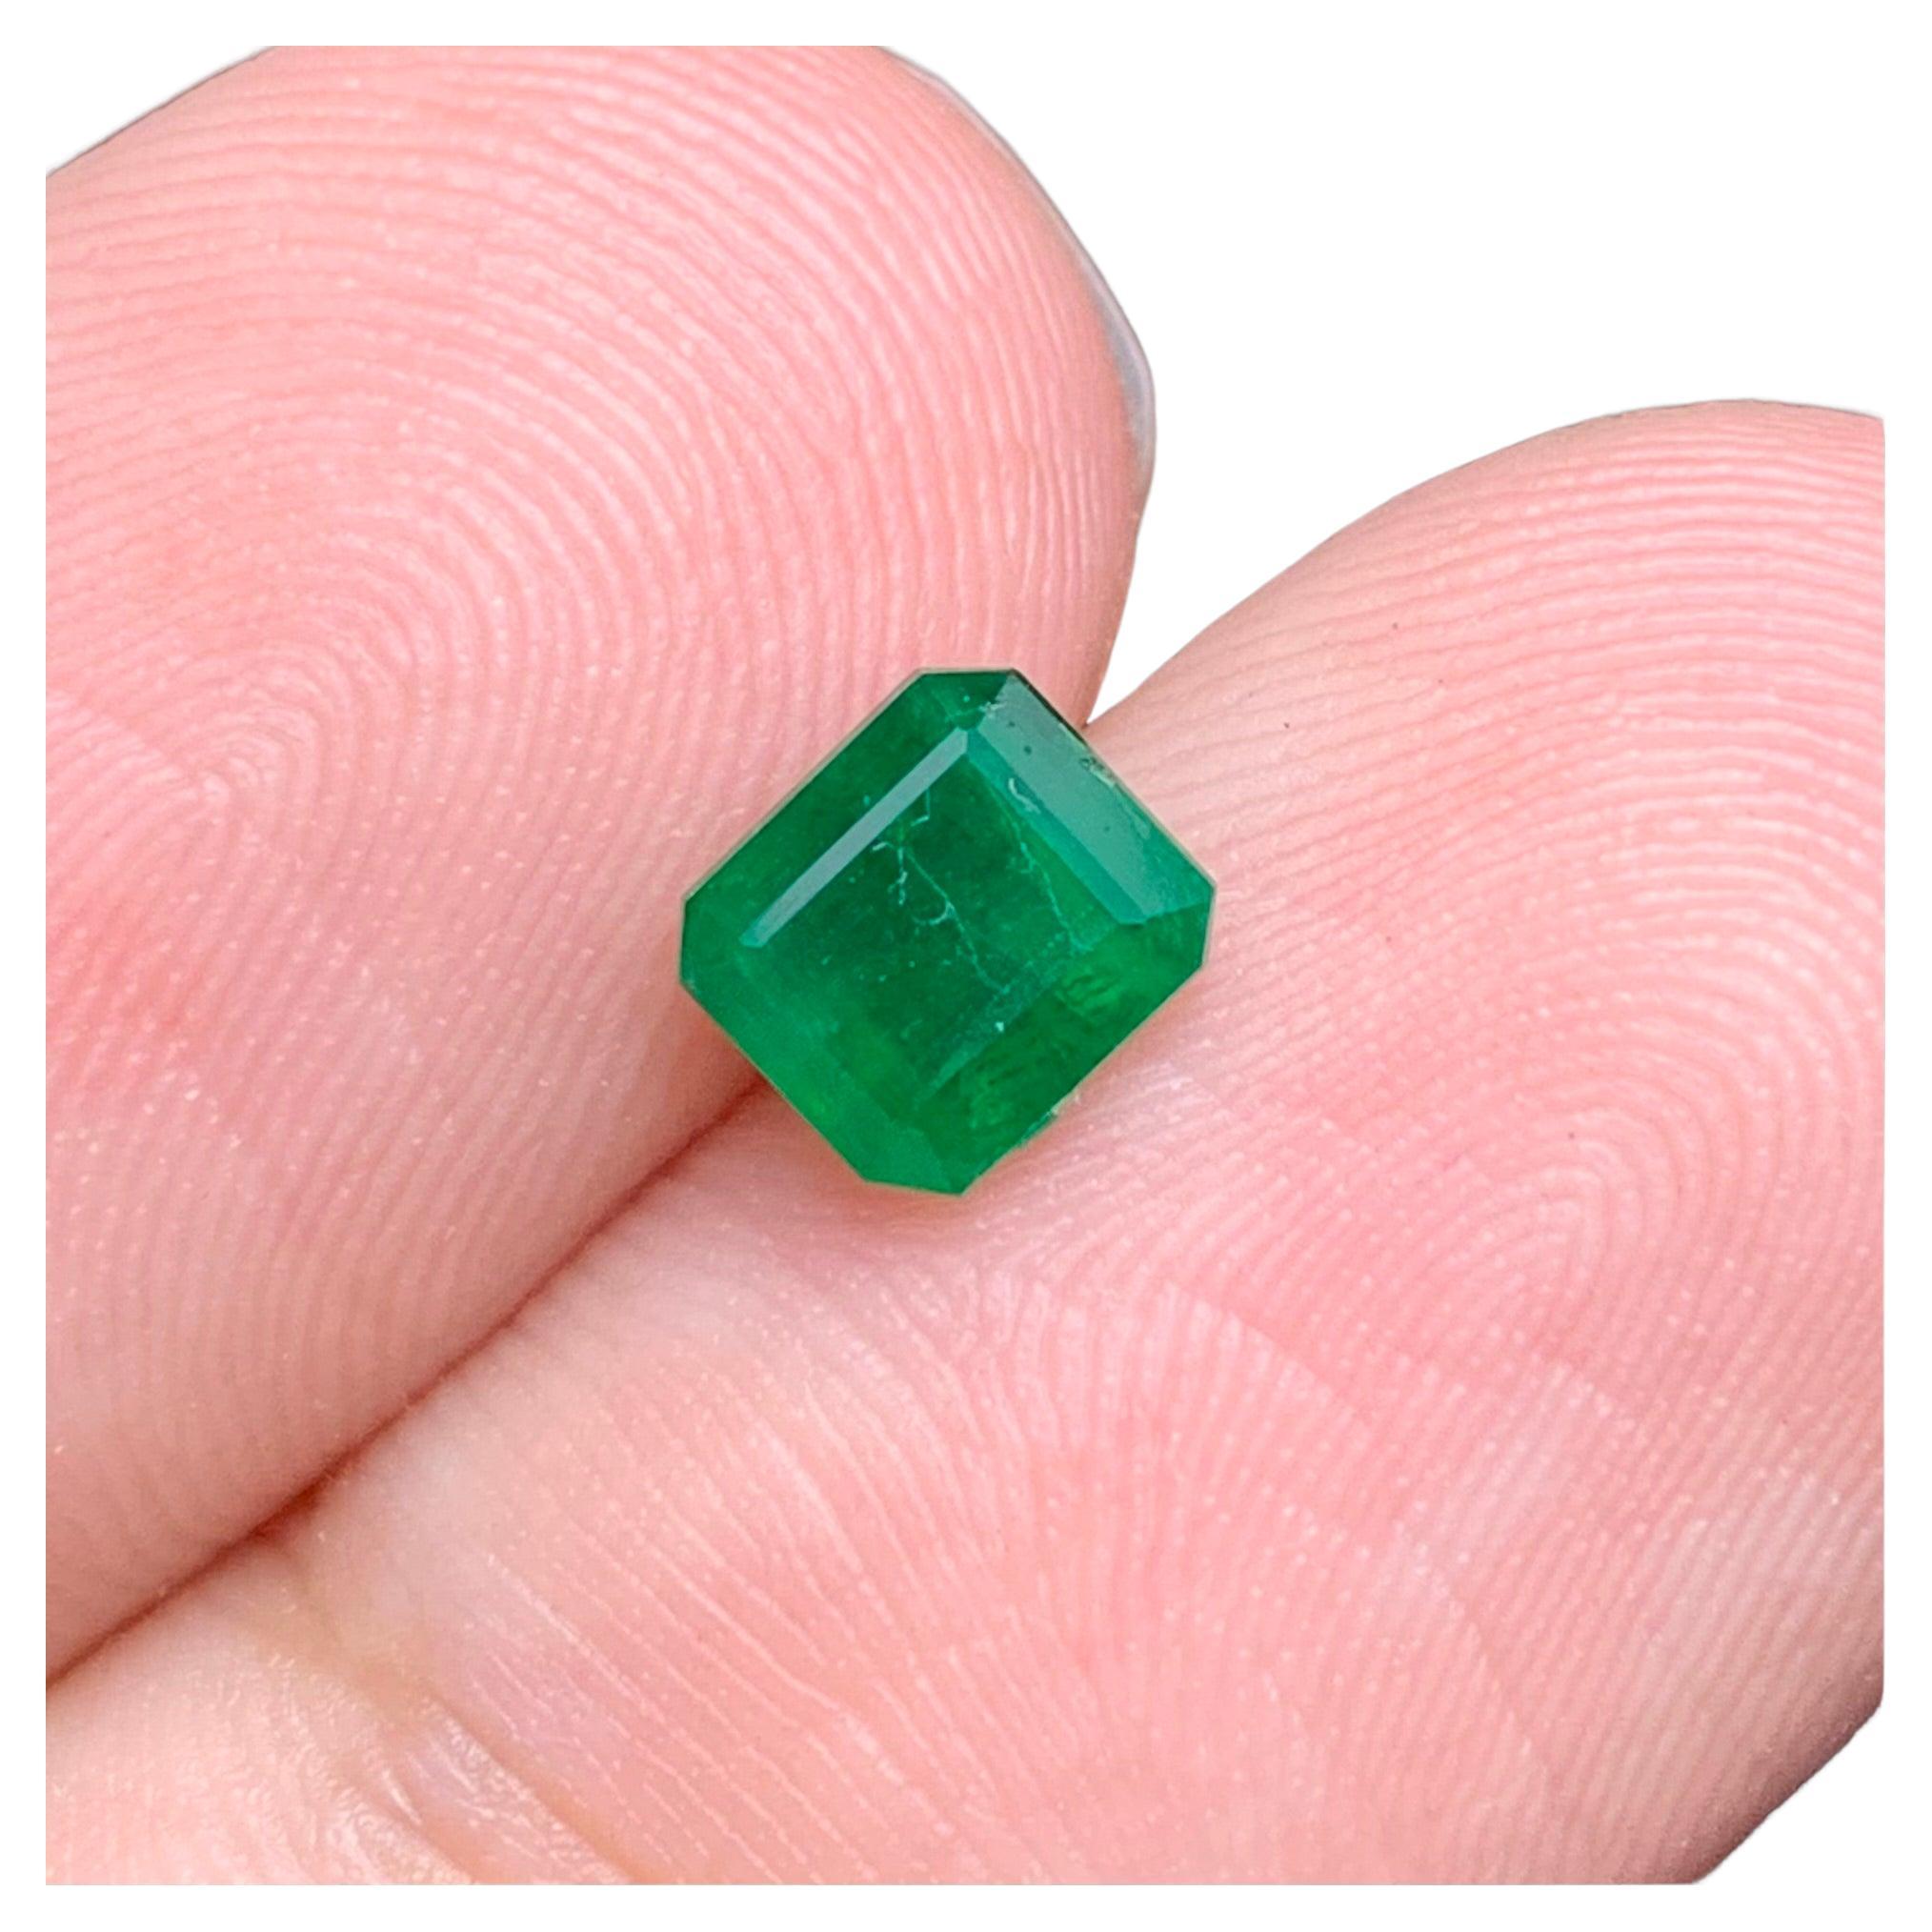 0.85 Carat Natural Loose Emerald Gemstone From Swat Mine, Pakistan  For Sale